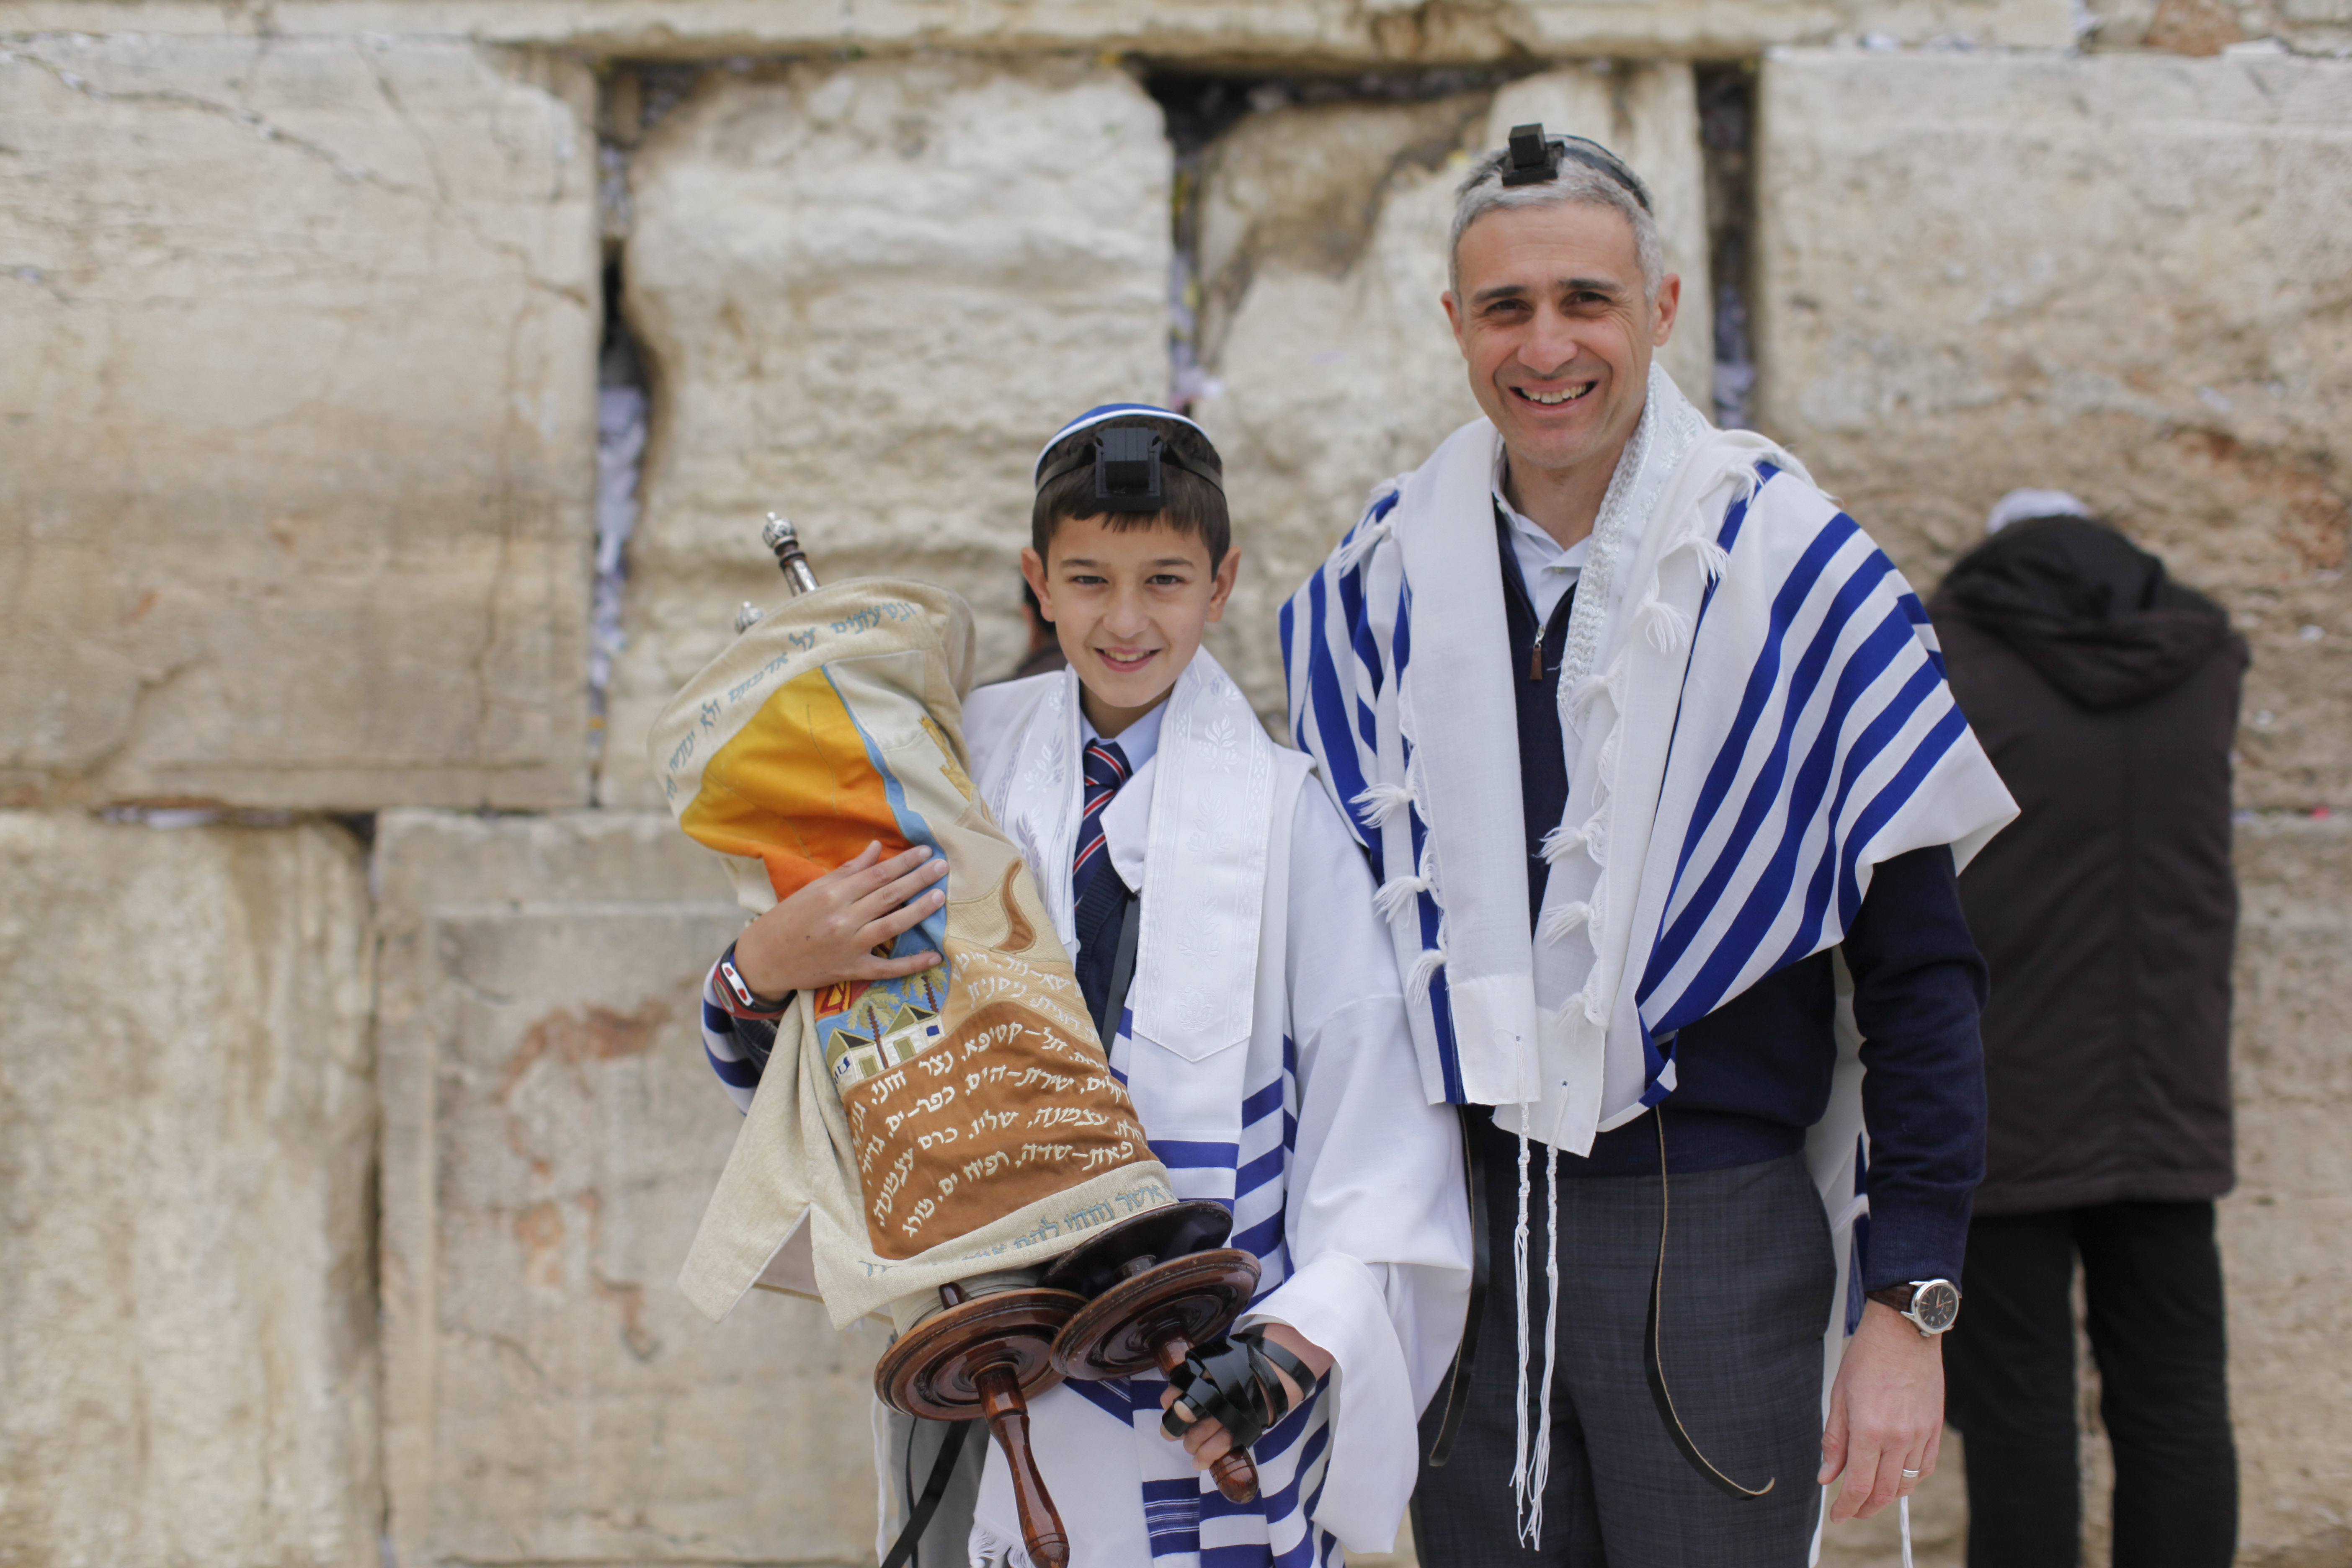 Give Cash for a Bar Mitzvah Gift